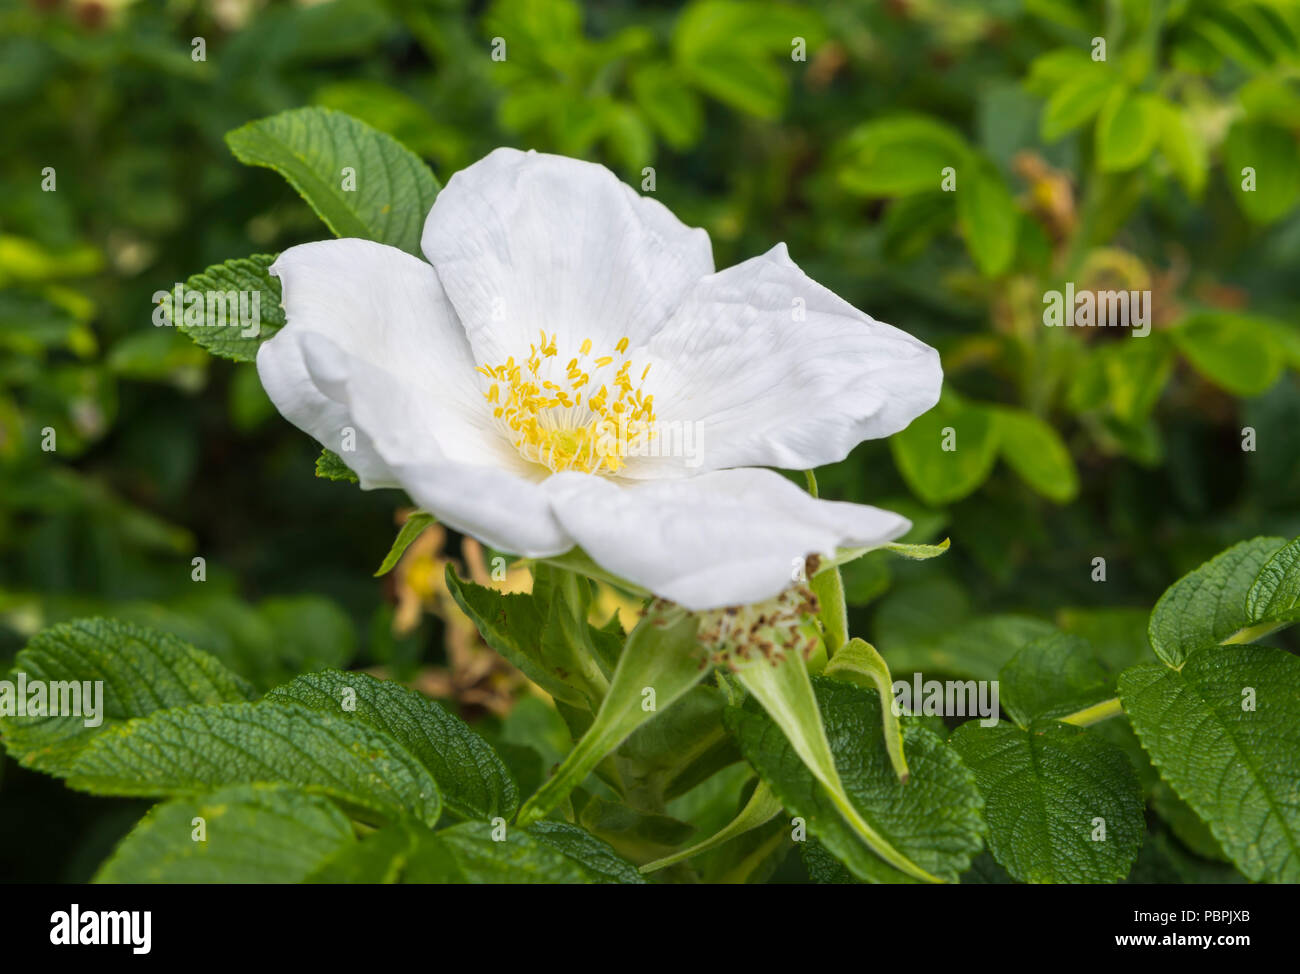 Potentilla fruticosa, a white flowering Shrubby cinquefoil flower in Summer in West Sussex, England, UK. Single flower closeup. Stock Photo